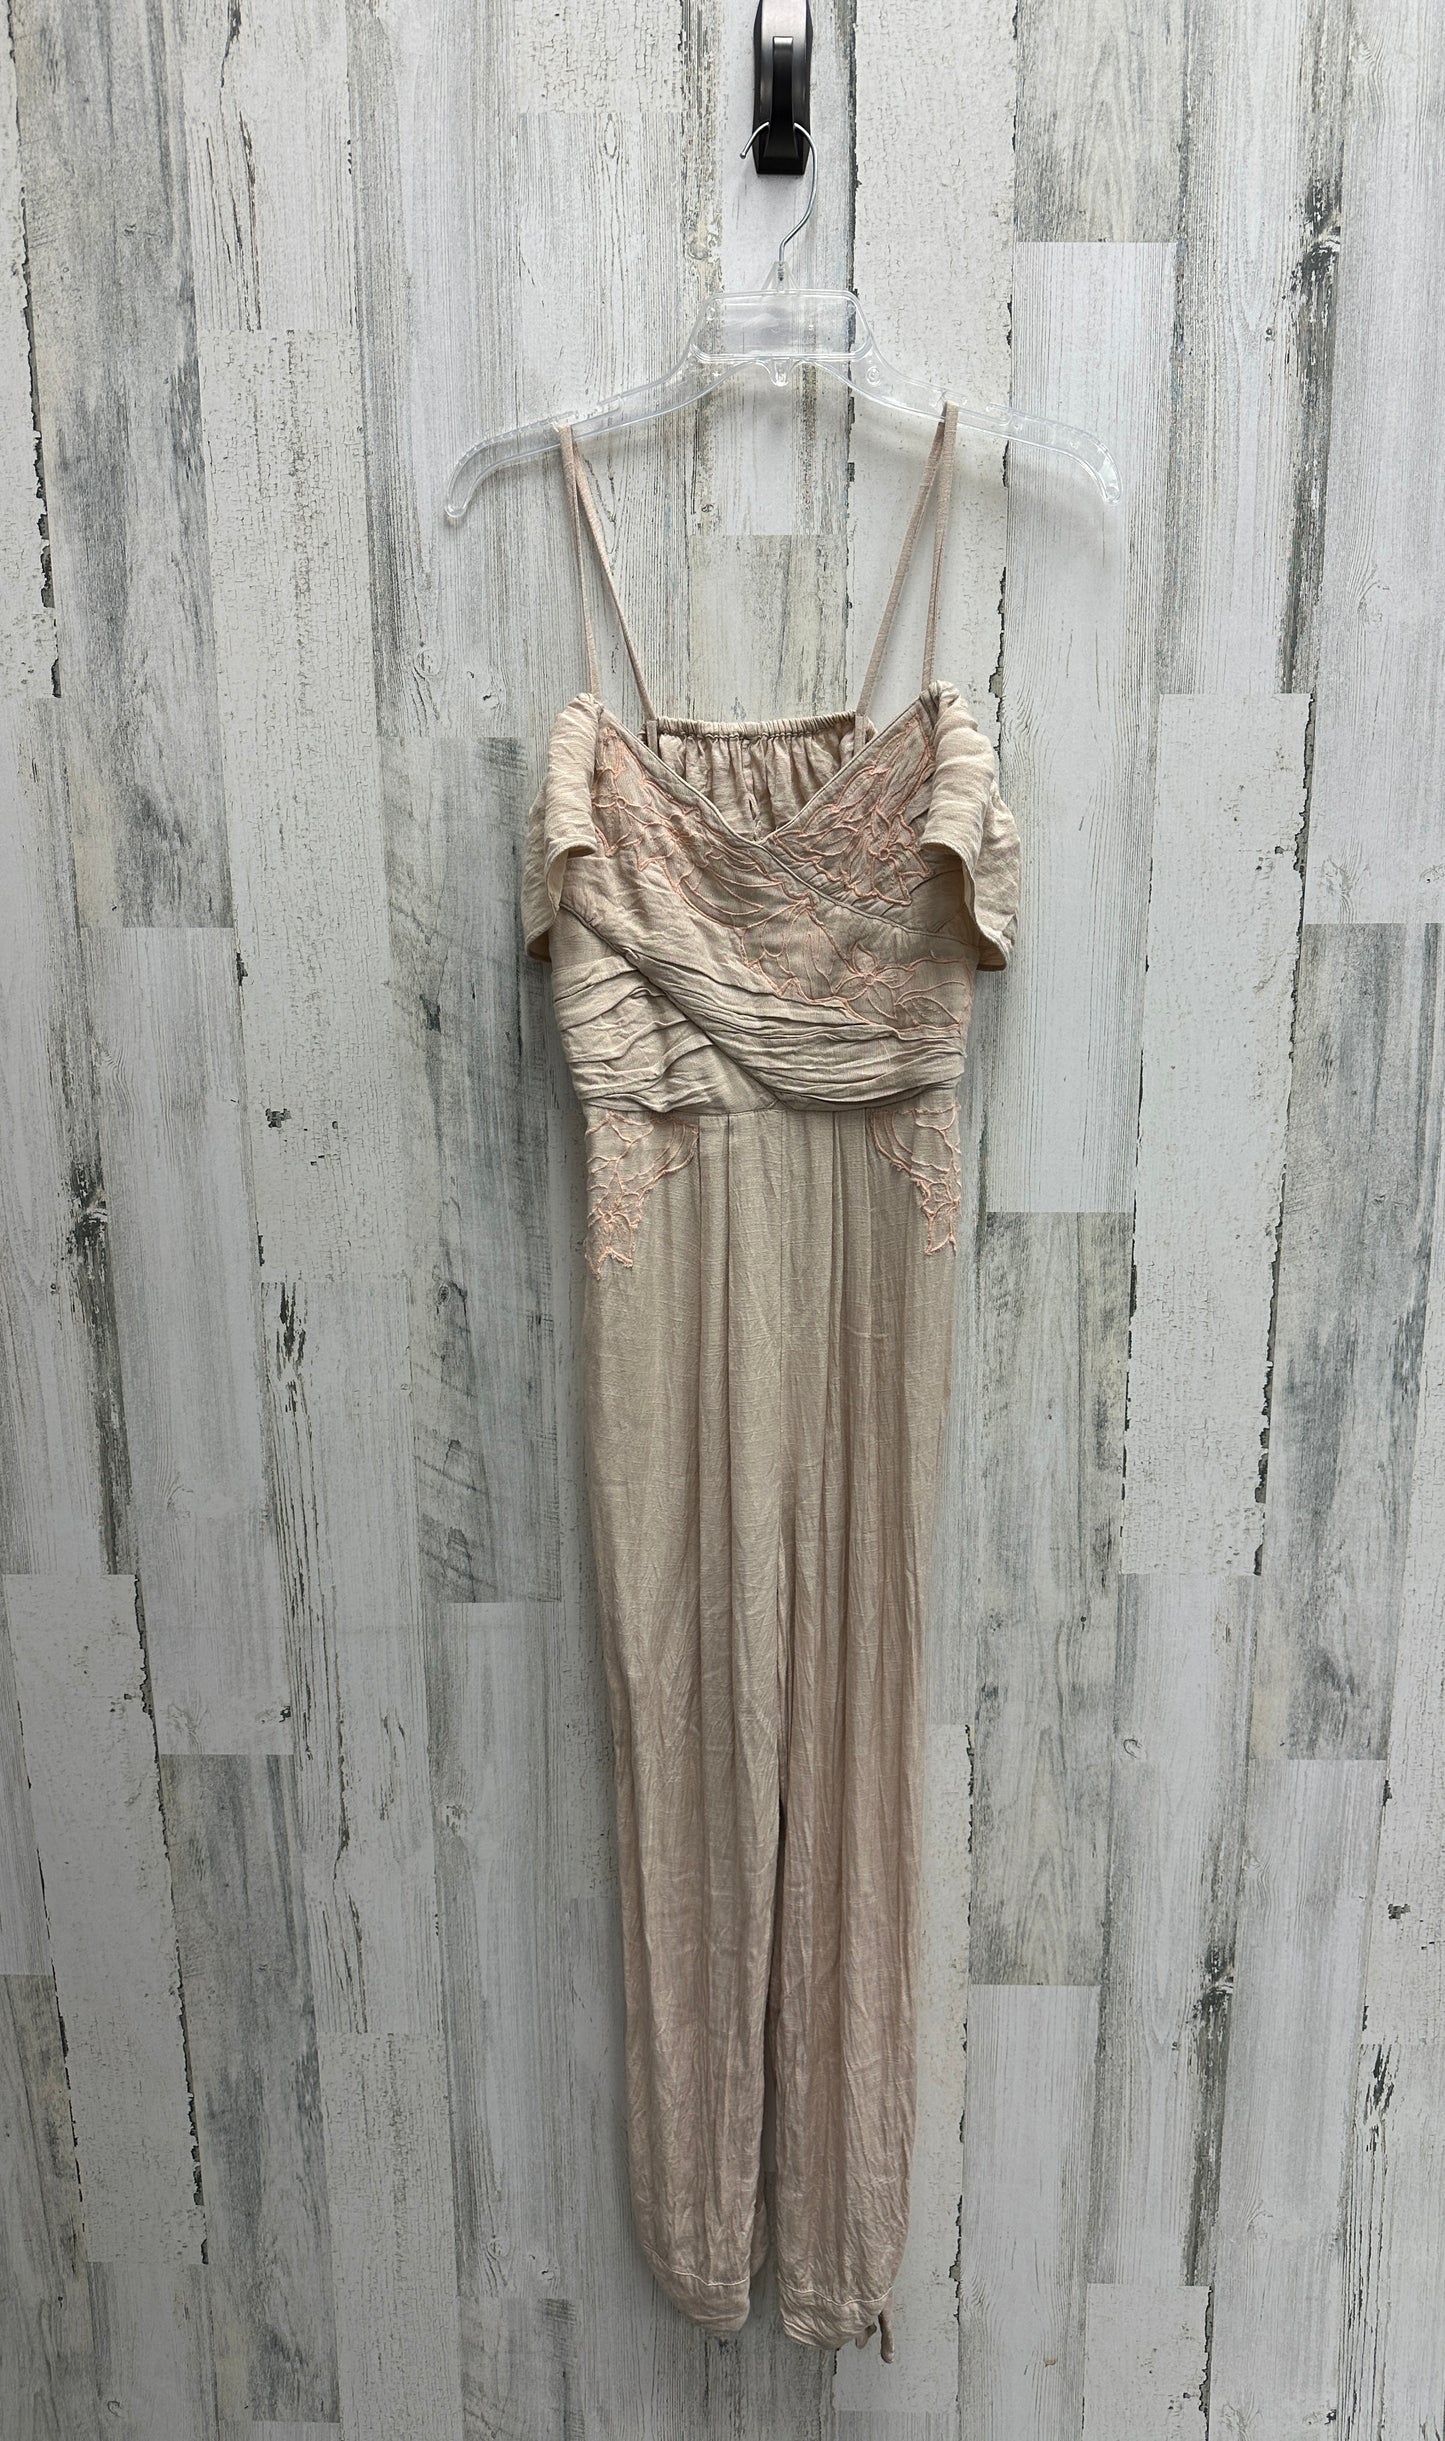 Jumpsuit By Free People  Size: Xs